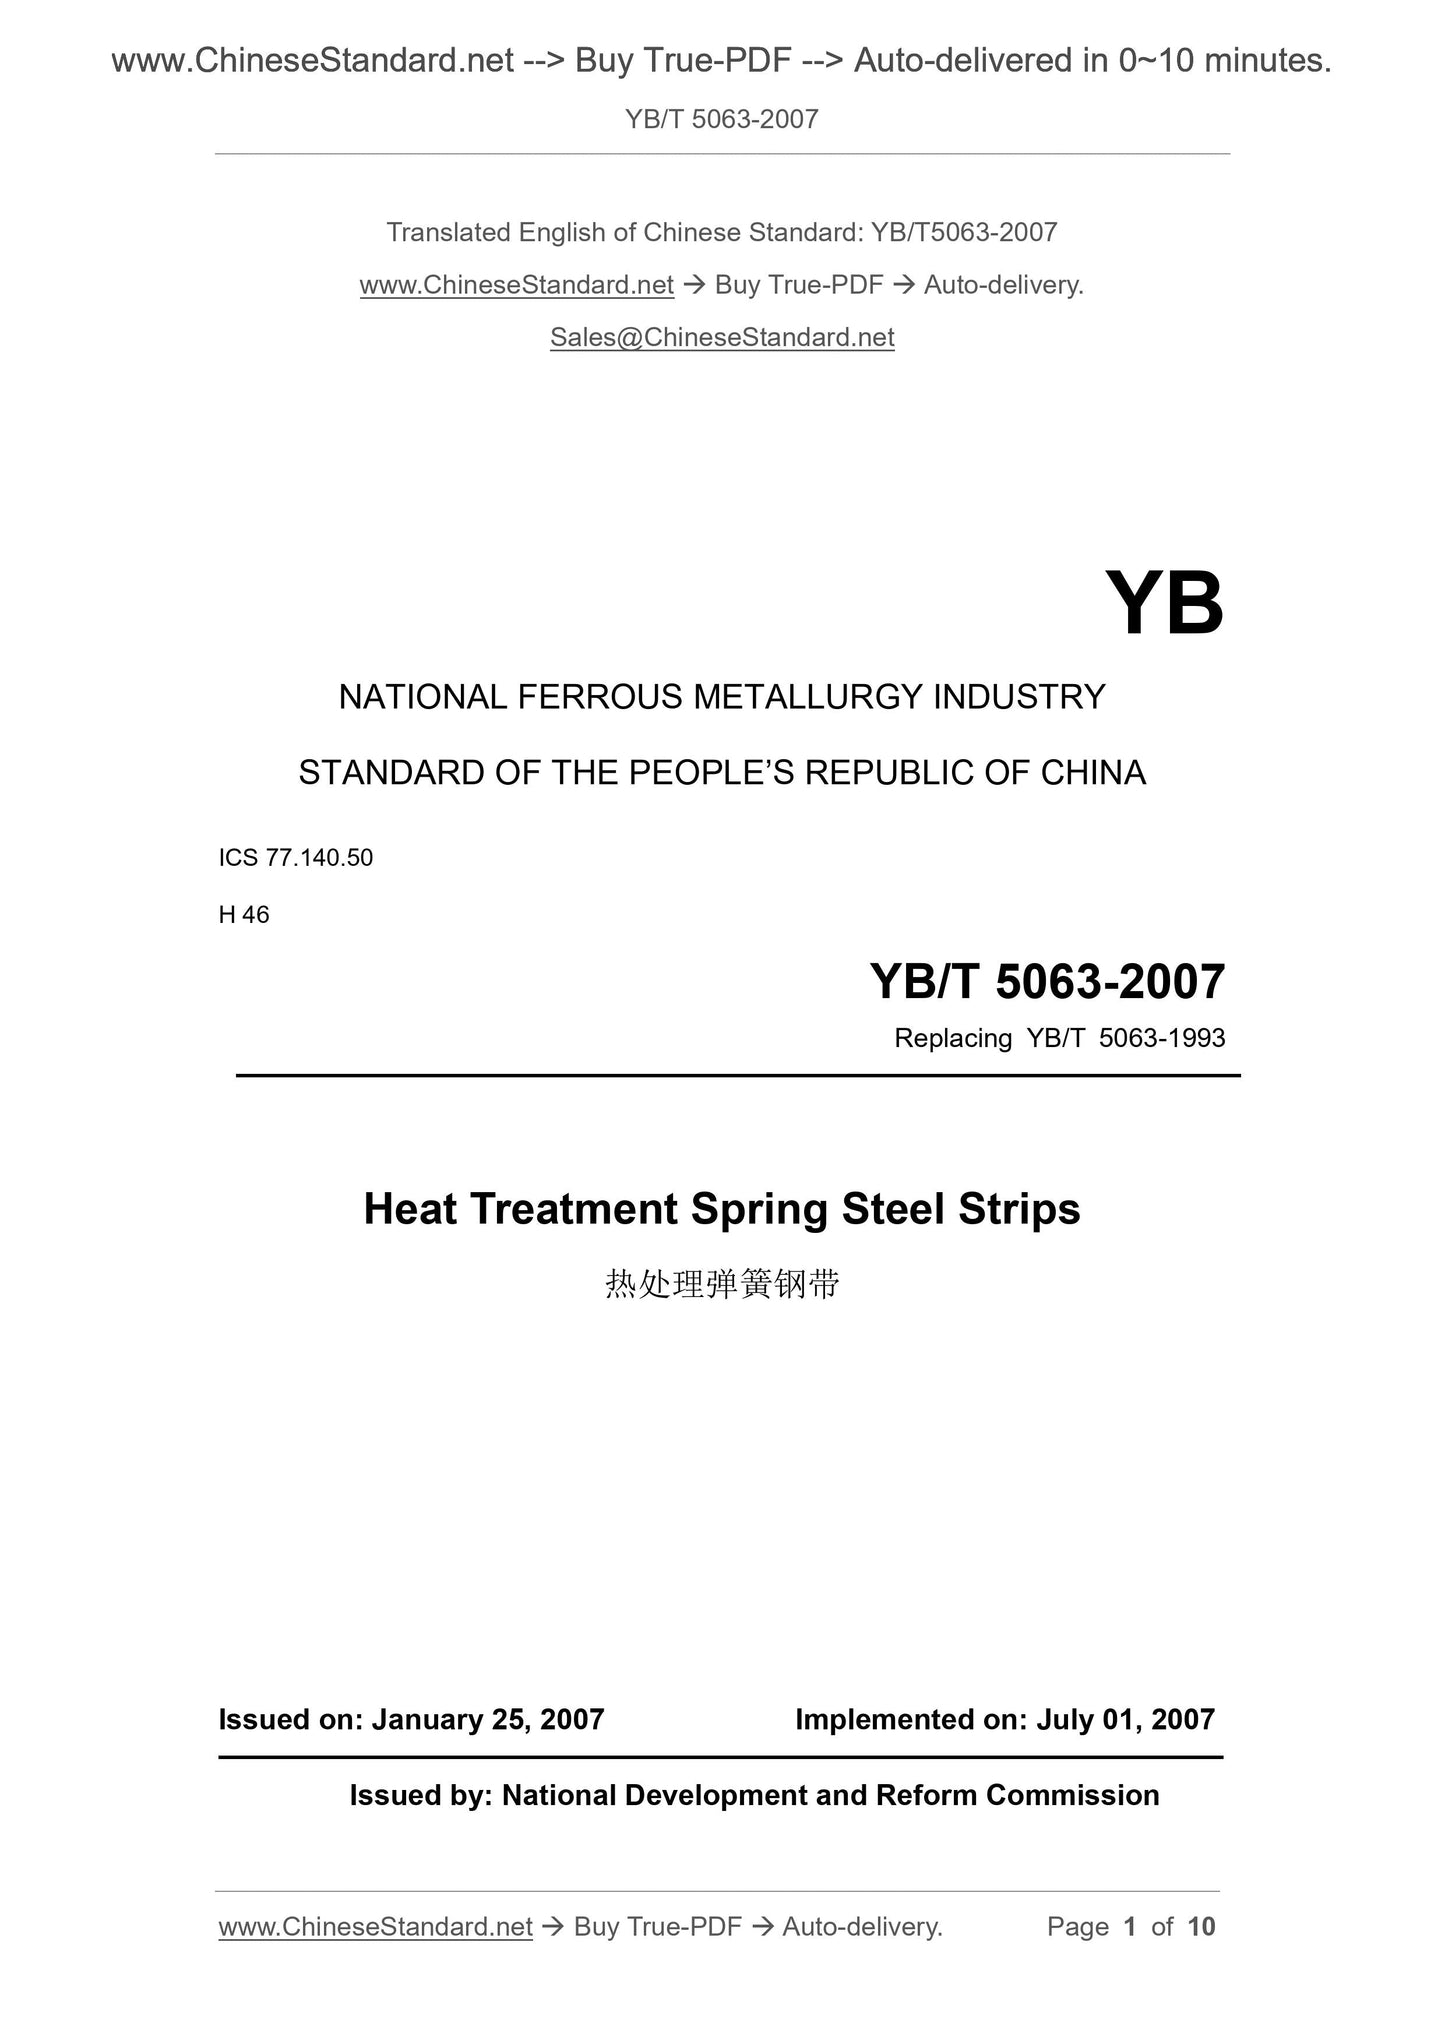 YB/T 5063-2007 Page 1